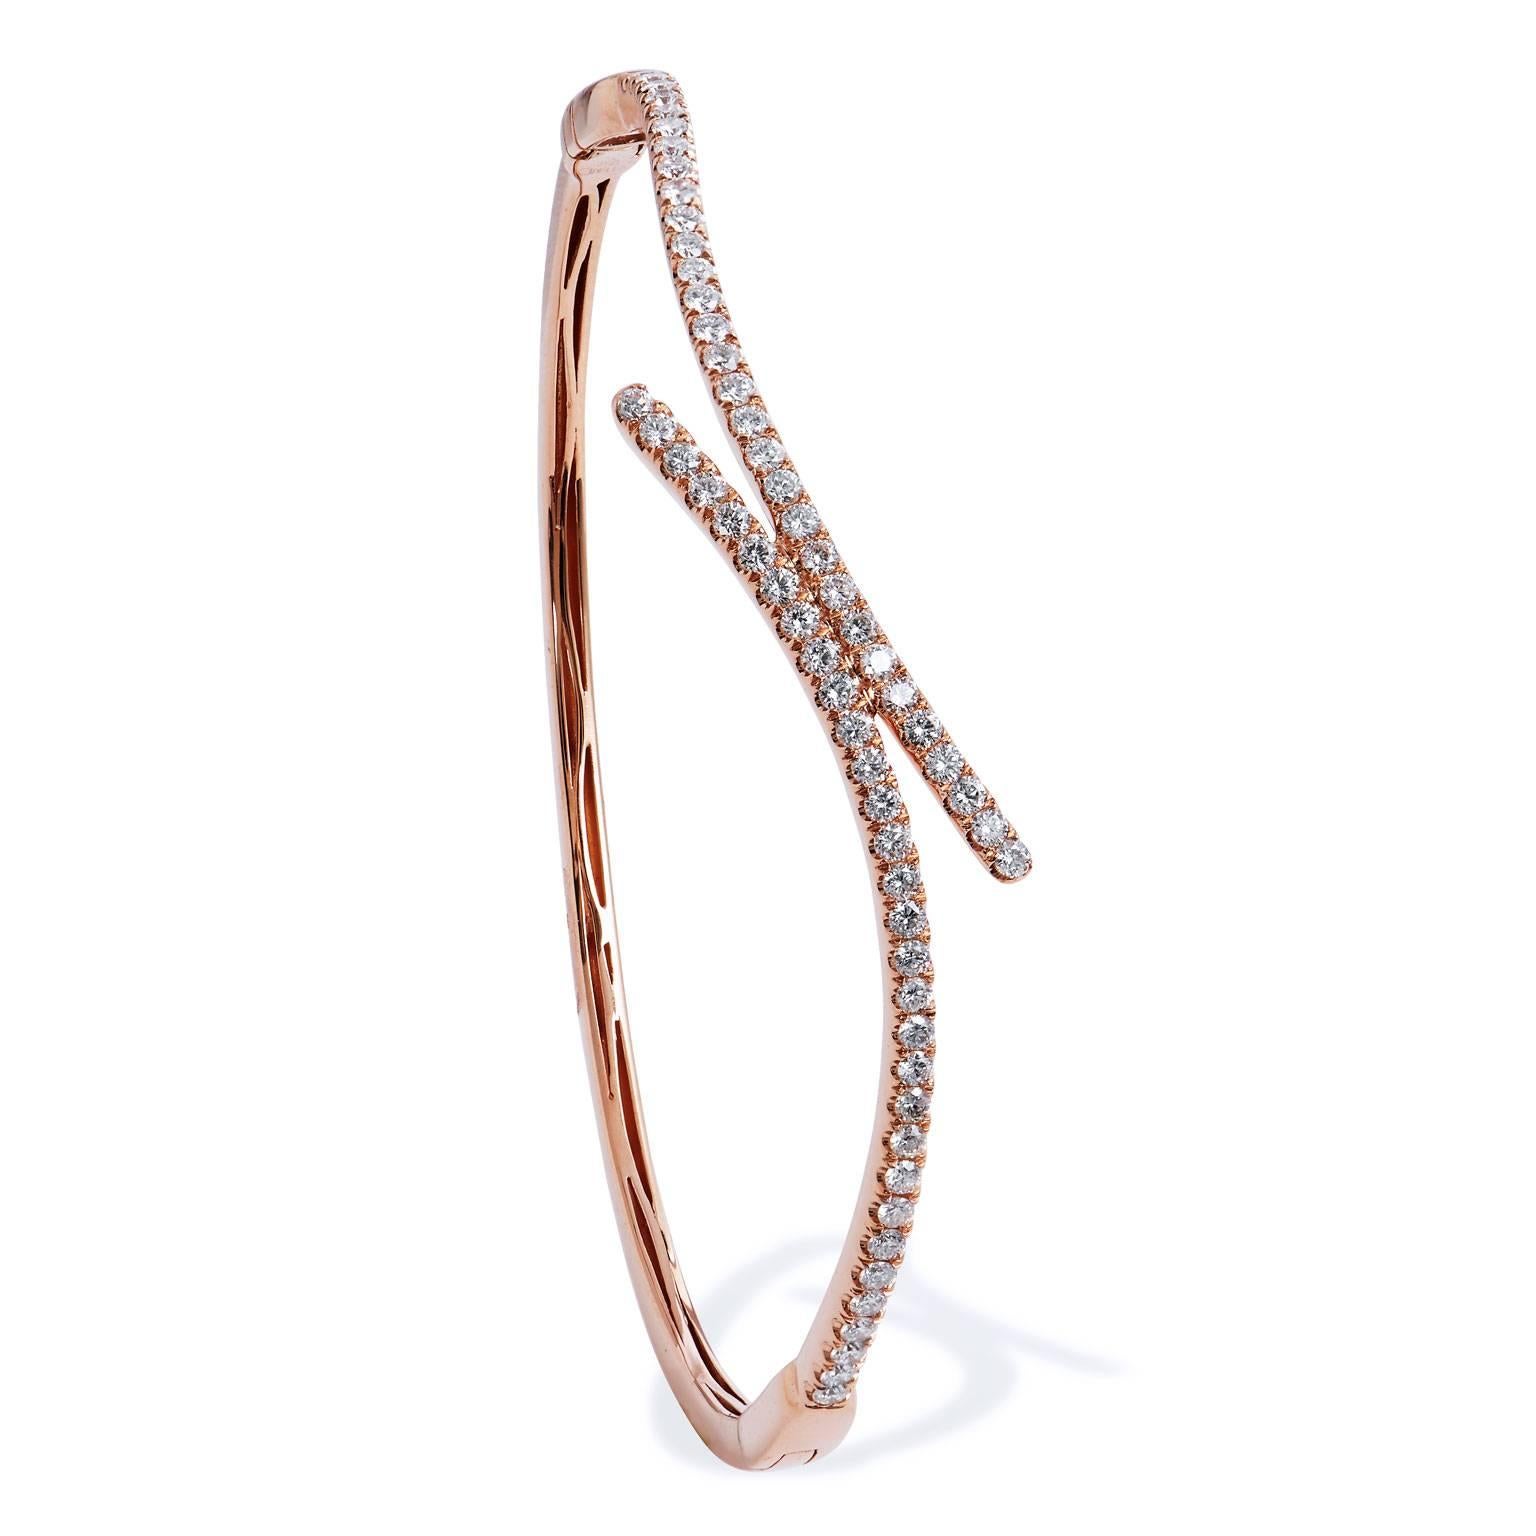 18 karat rose gold bends with fluidity in this hinge bracelet featuring 1.13 carat of pave-set diamonds.